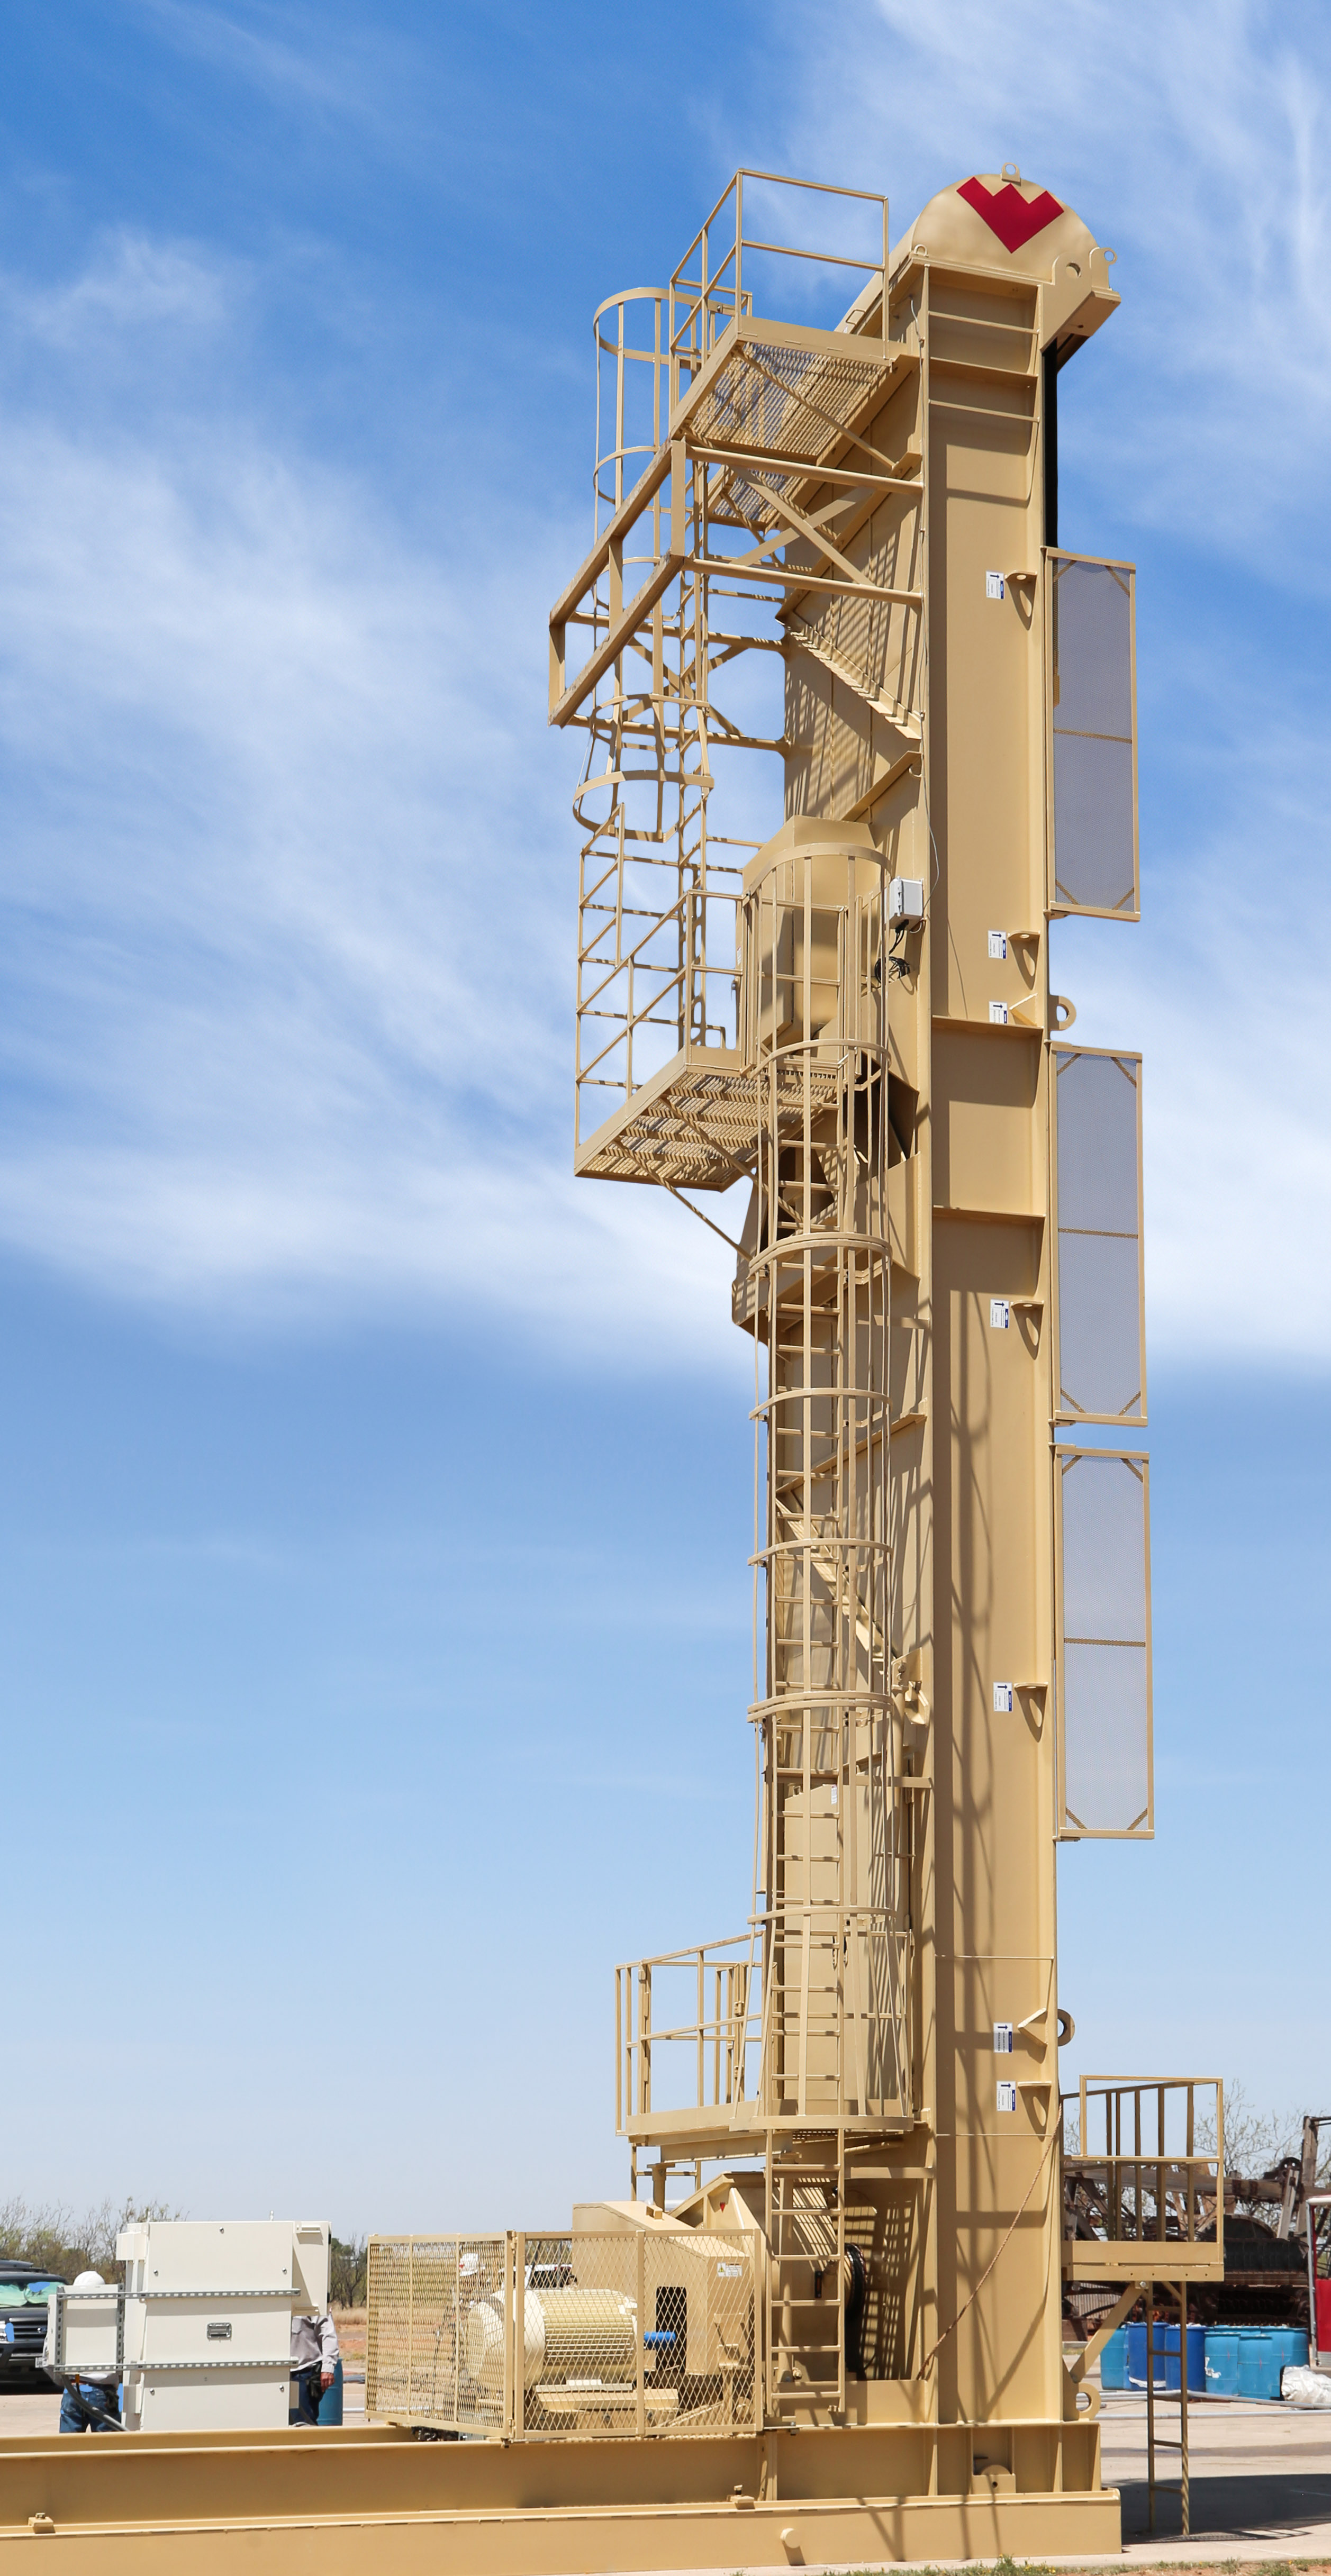 Weatherford’s new Rotaflex long-stroke pumping unit improves artificial lift efficiency.